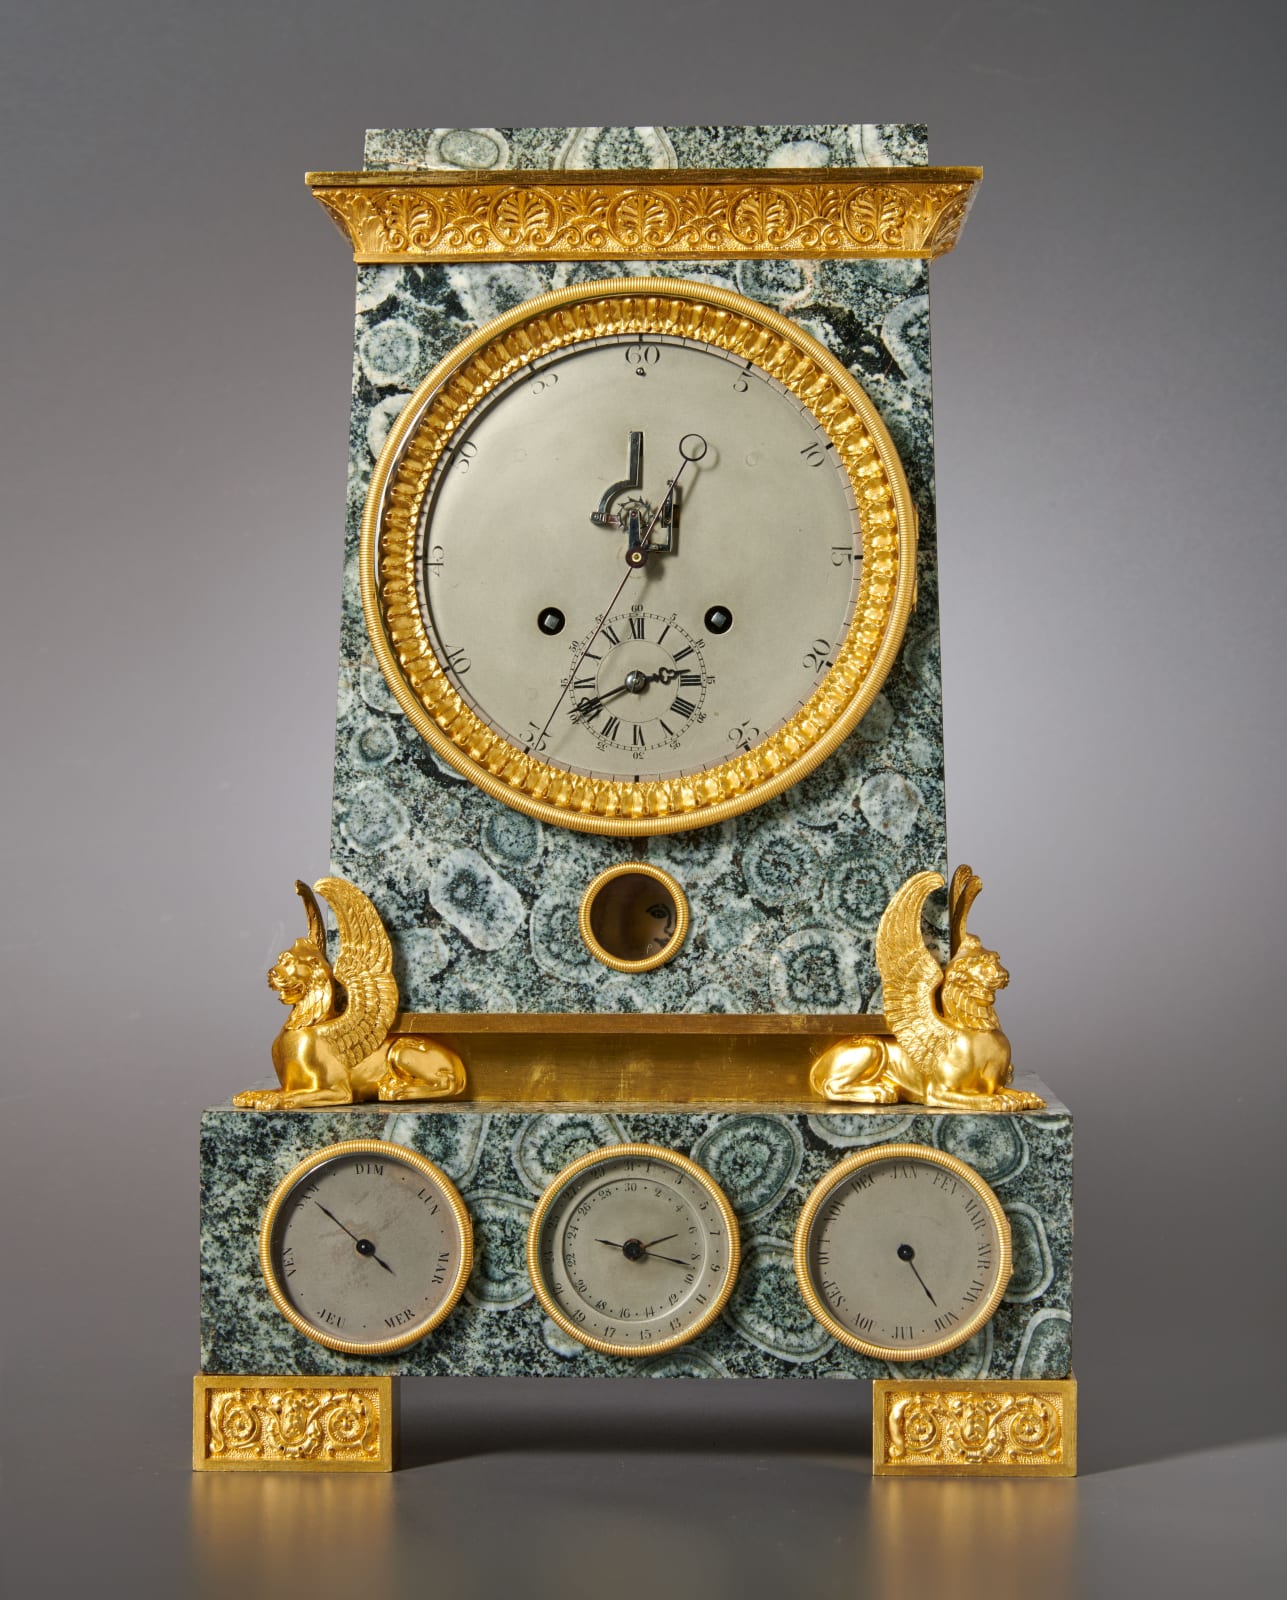 Lépine (attributed to), A Louis Philippe astronomical table regulator